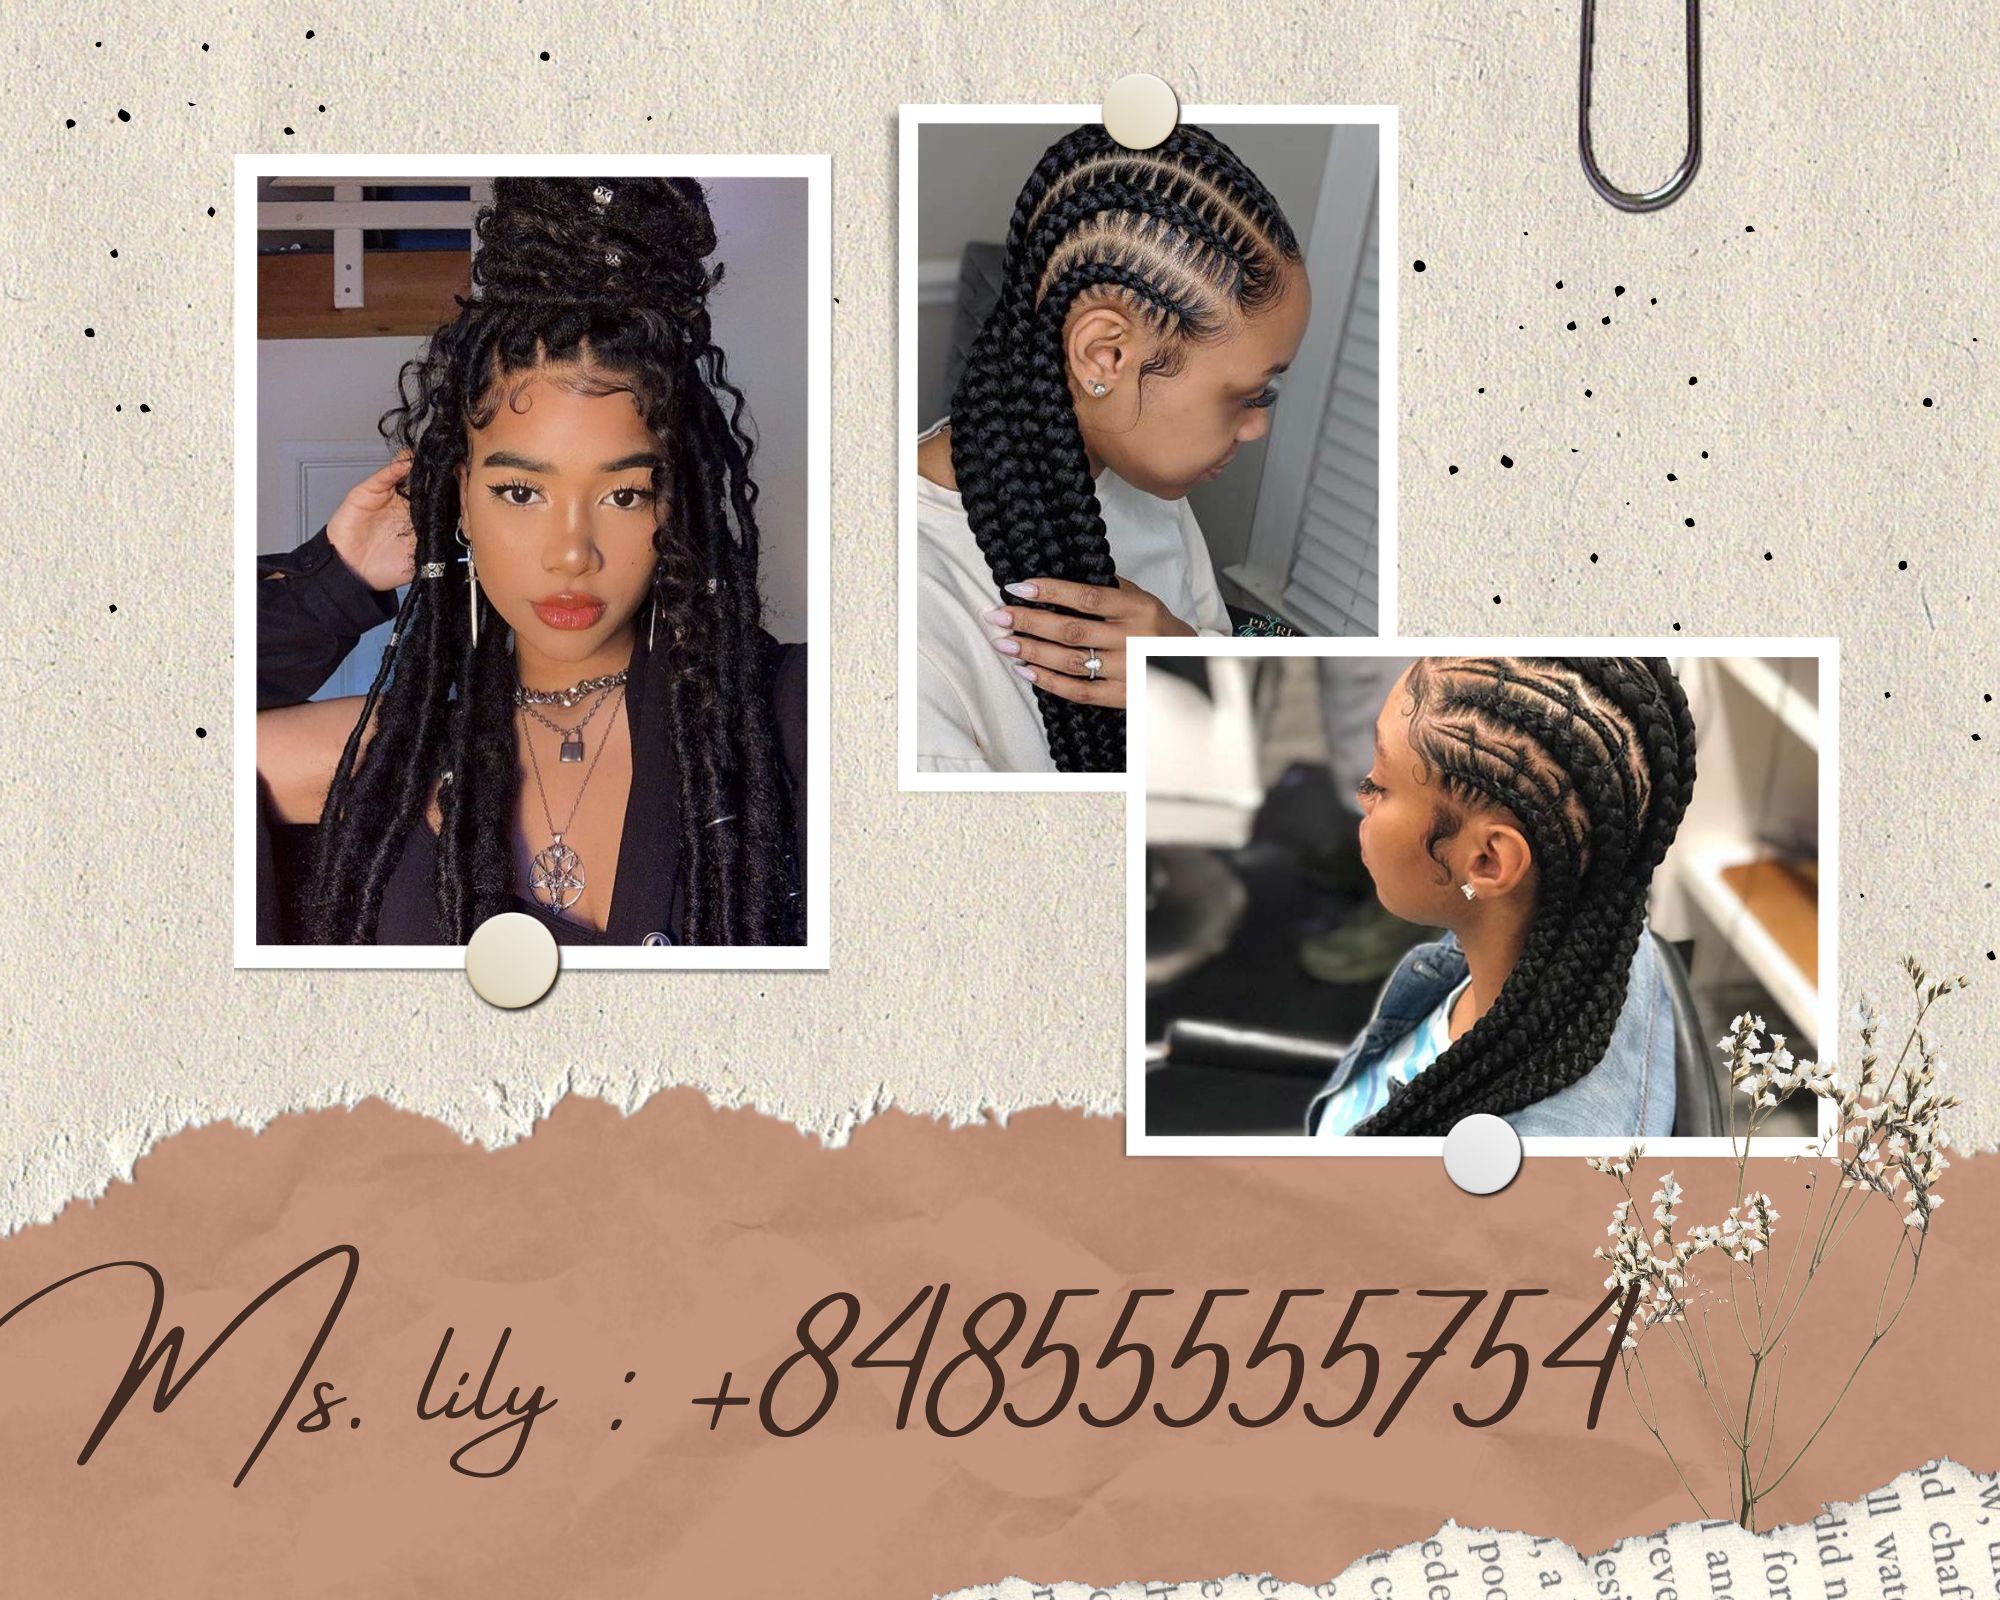 human-hair-suppliers-in-south-africa-sourcing-high-quality-hair1